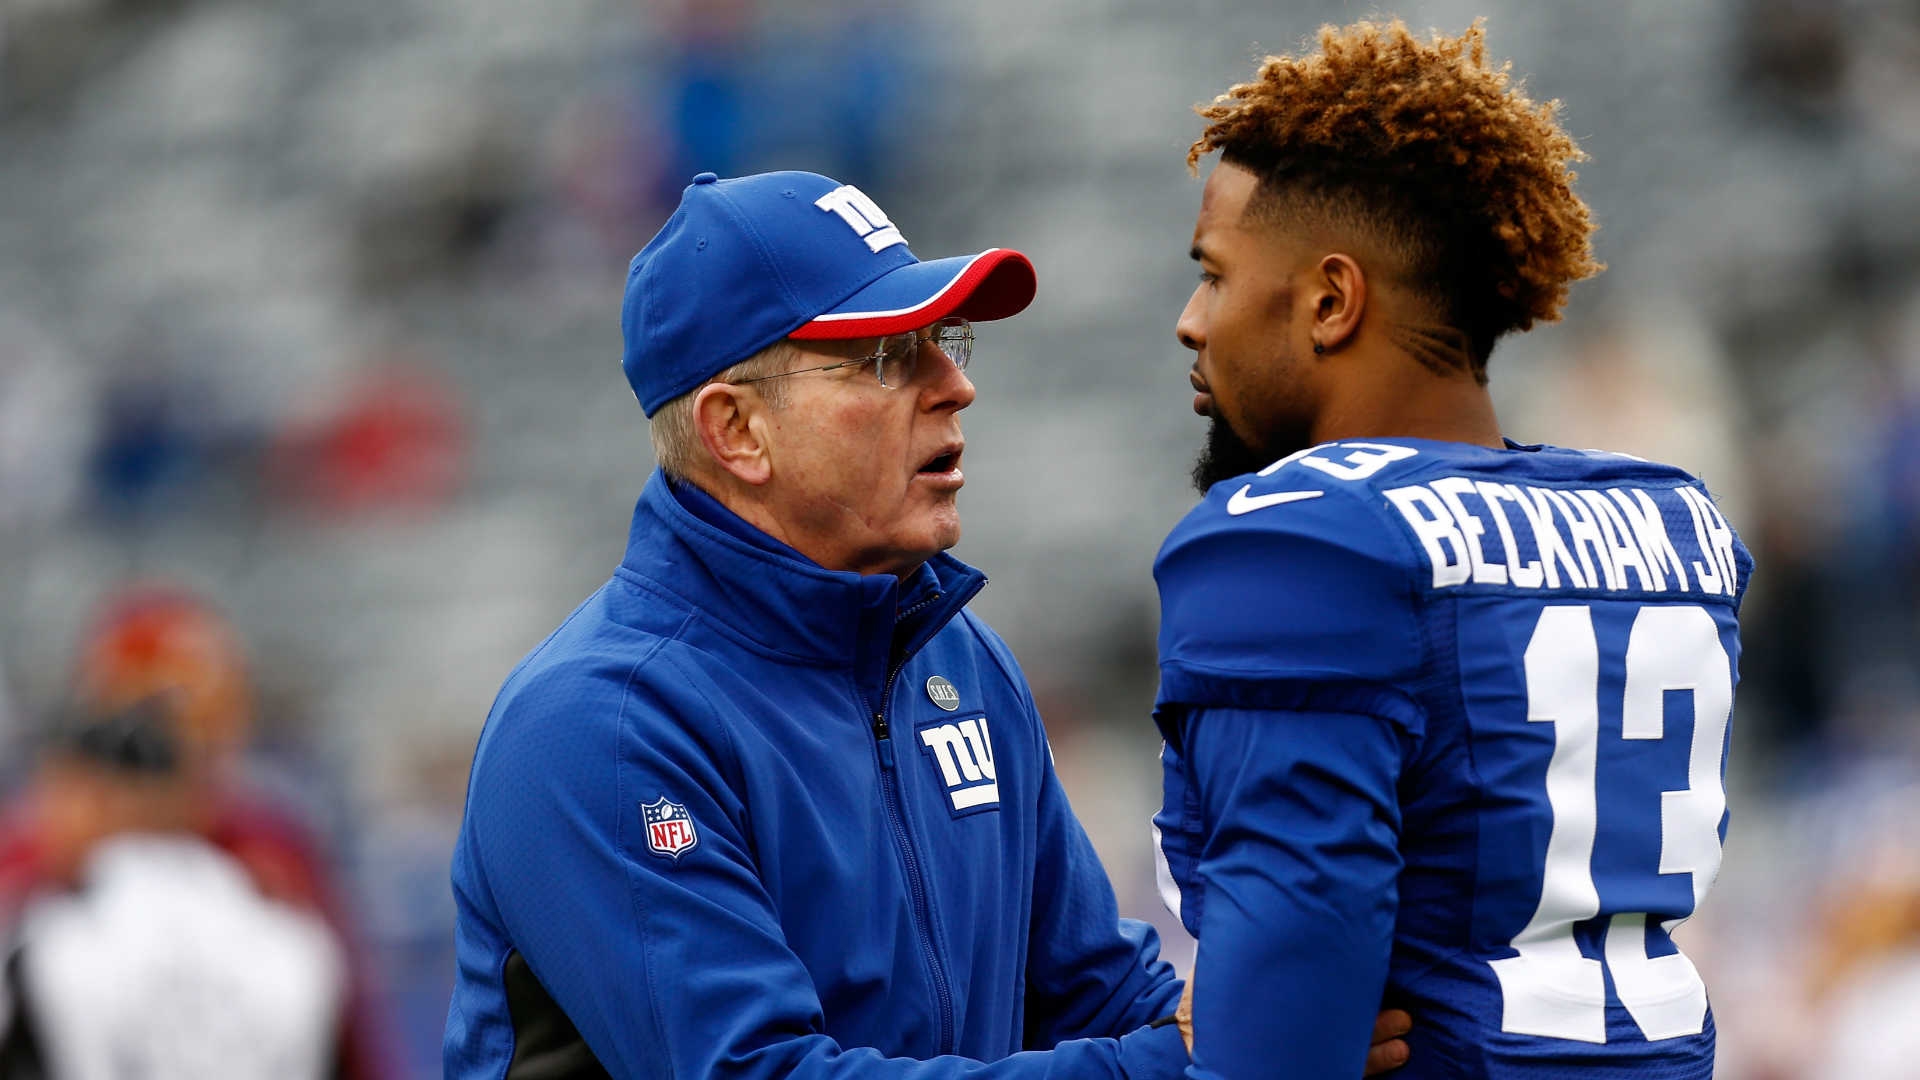 Odell Beckham Jr. enabling should be Tom Coughlin's last straw with Giants